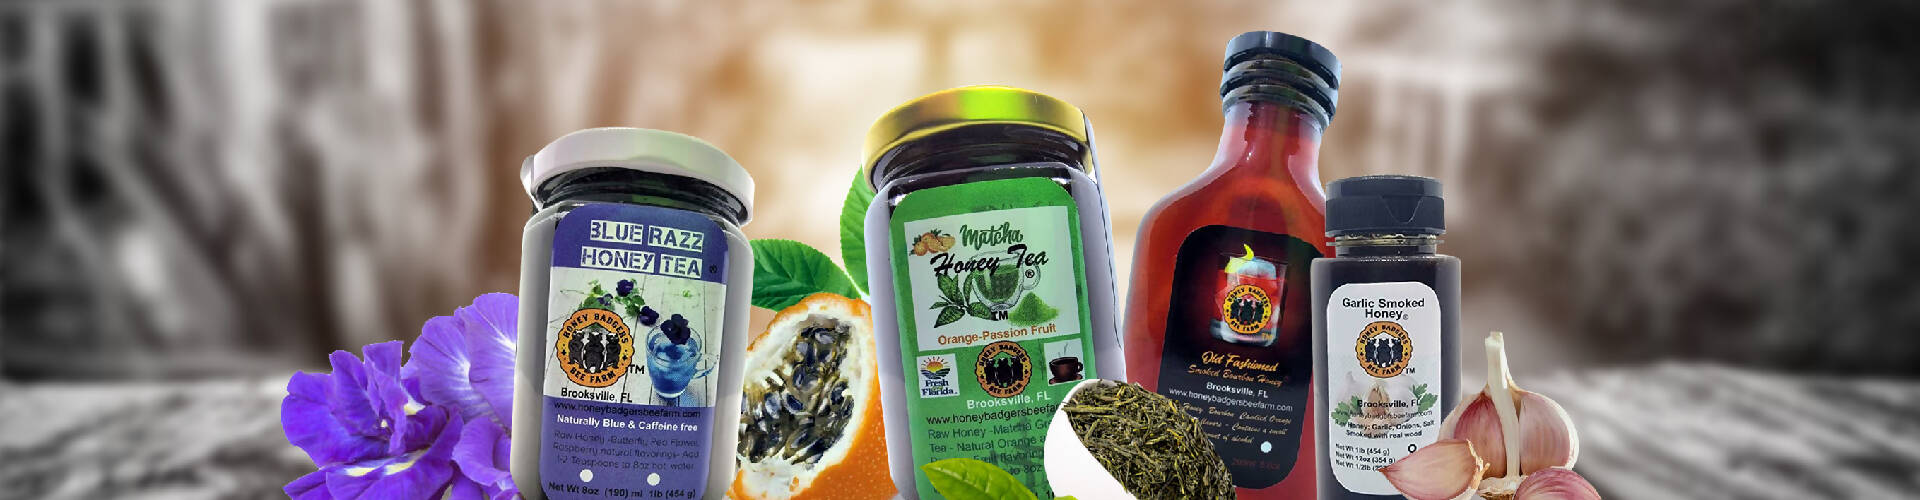 All-In-One Honey Teas - Honey Badgers Bee Farm - Airport Beverages 